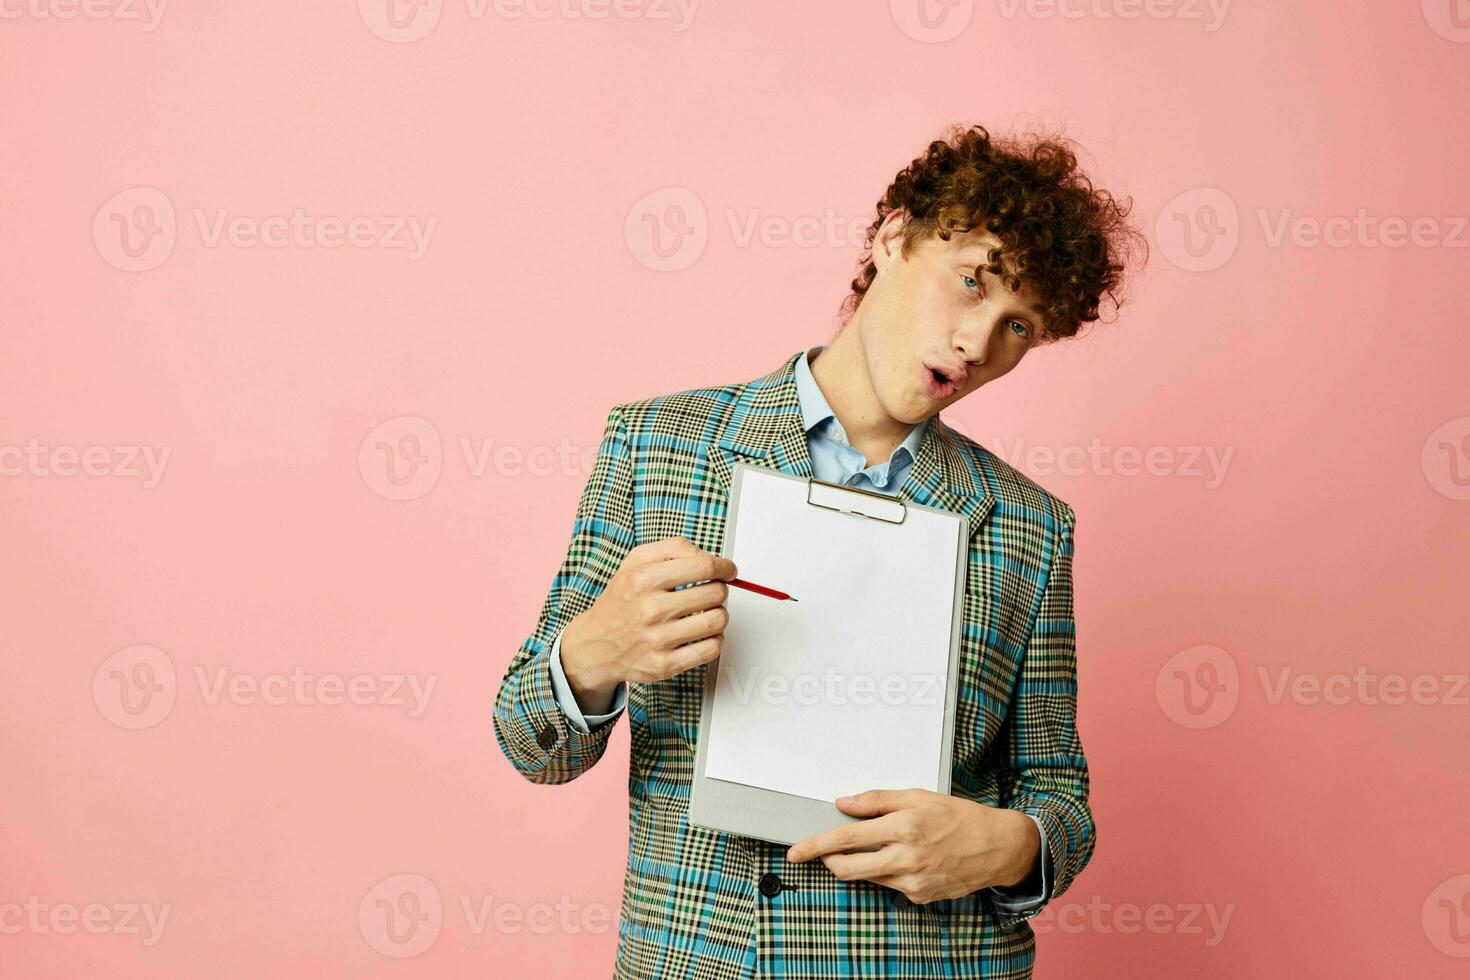 portrait of a young curly man in a business suit copy-space documents Lifestyle unaltered photo